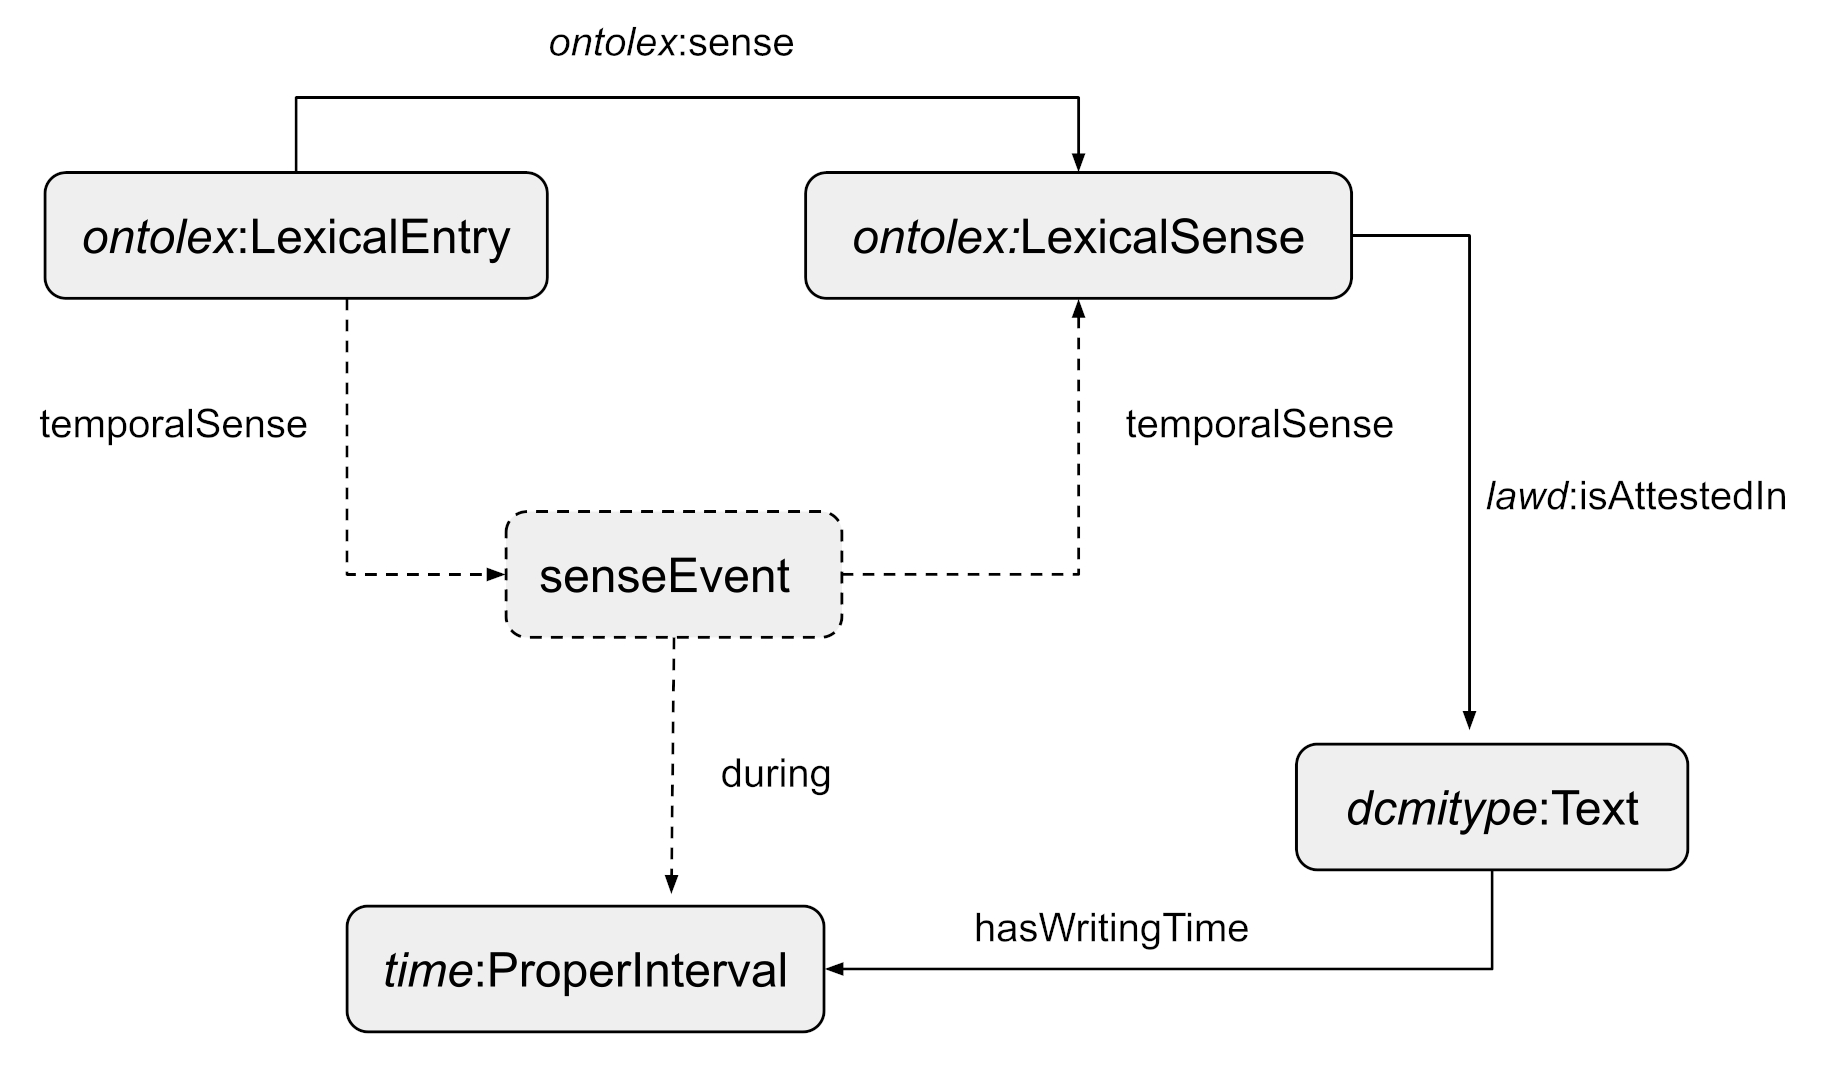 Flow chart beginning with the SenseEvent.